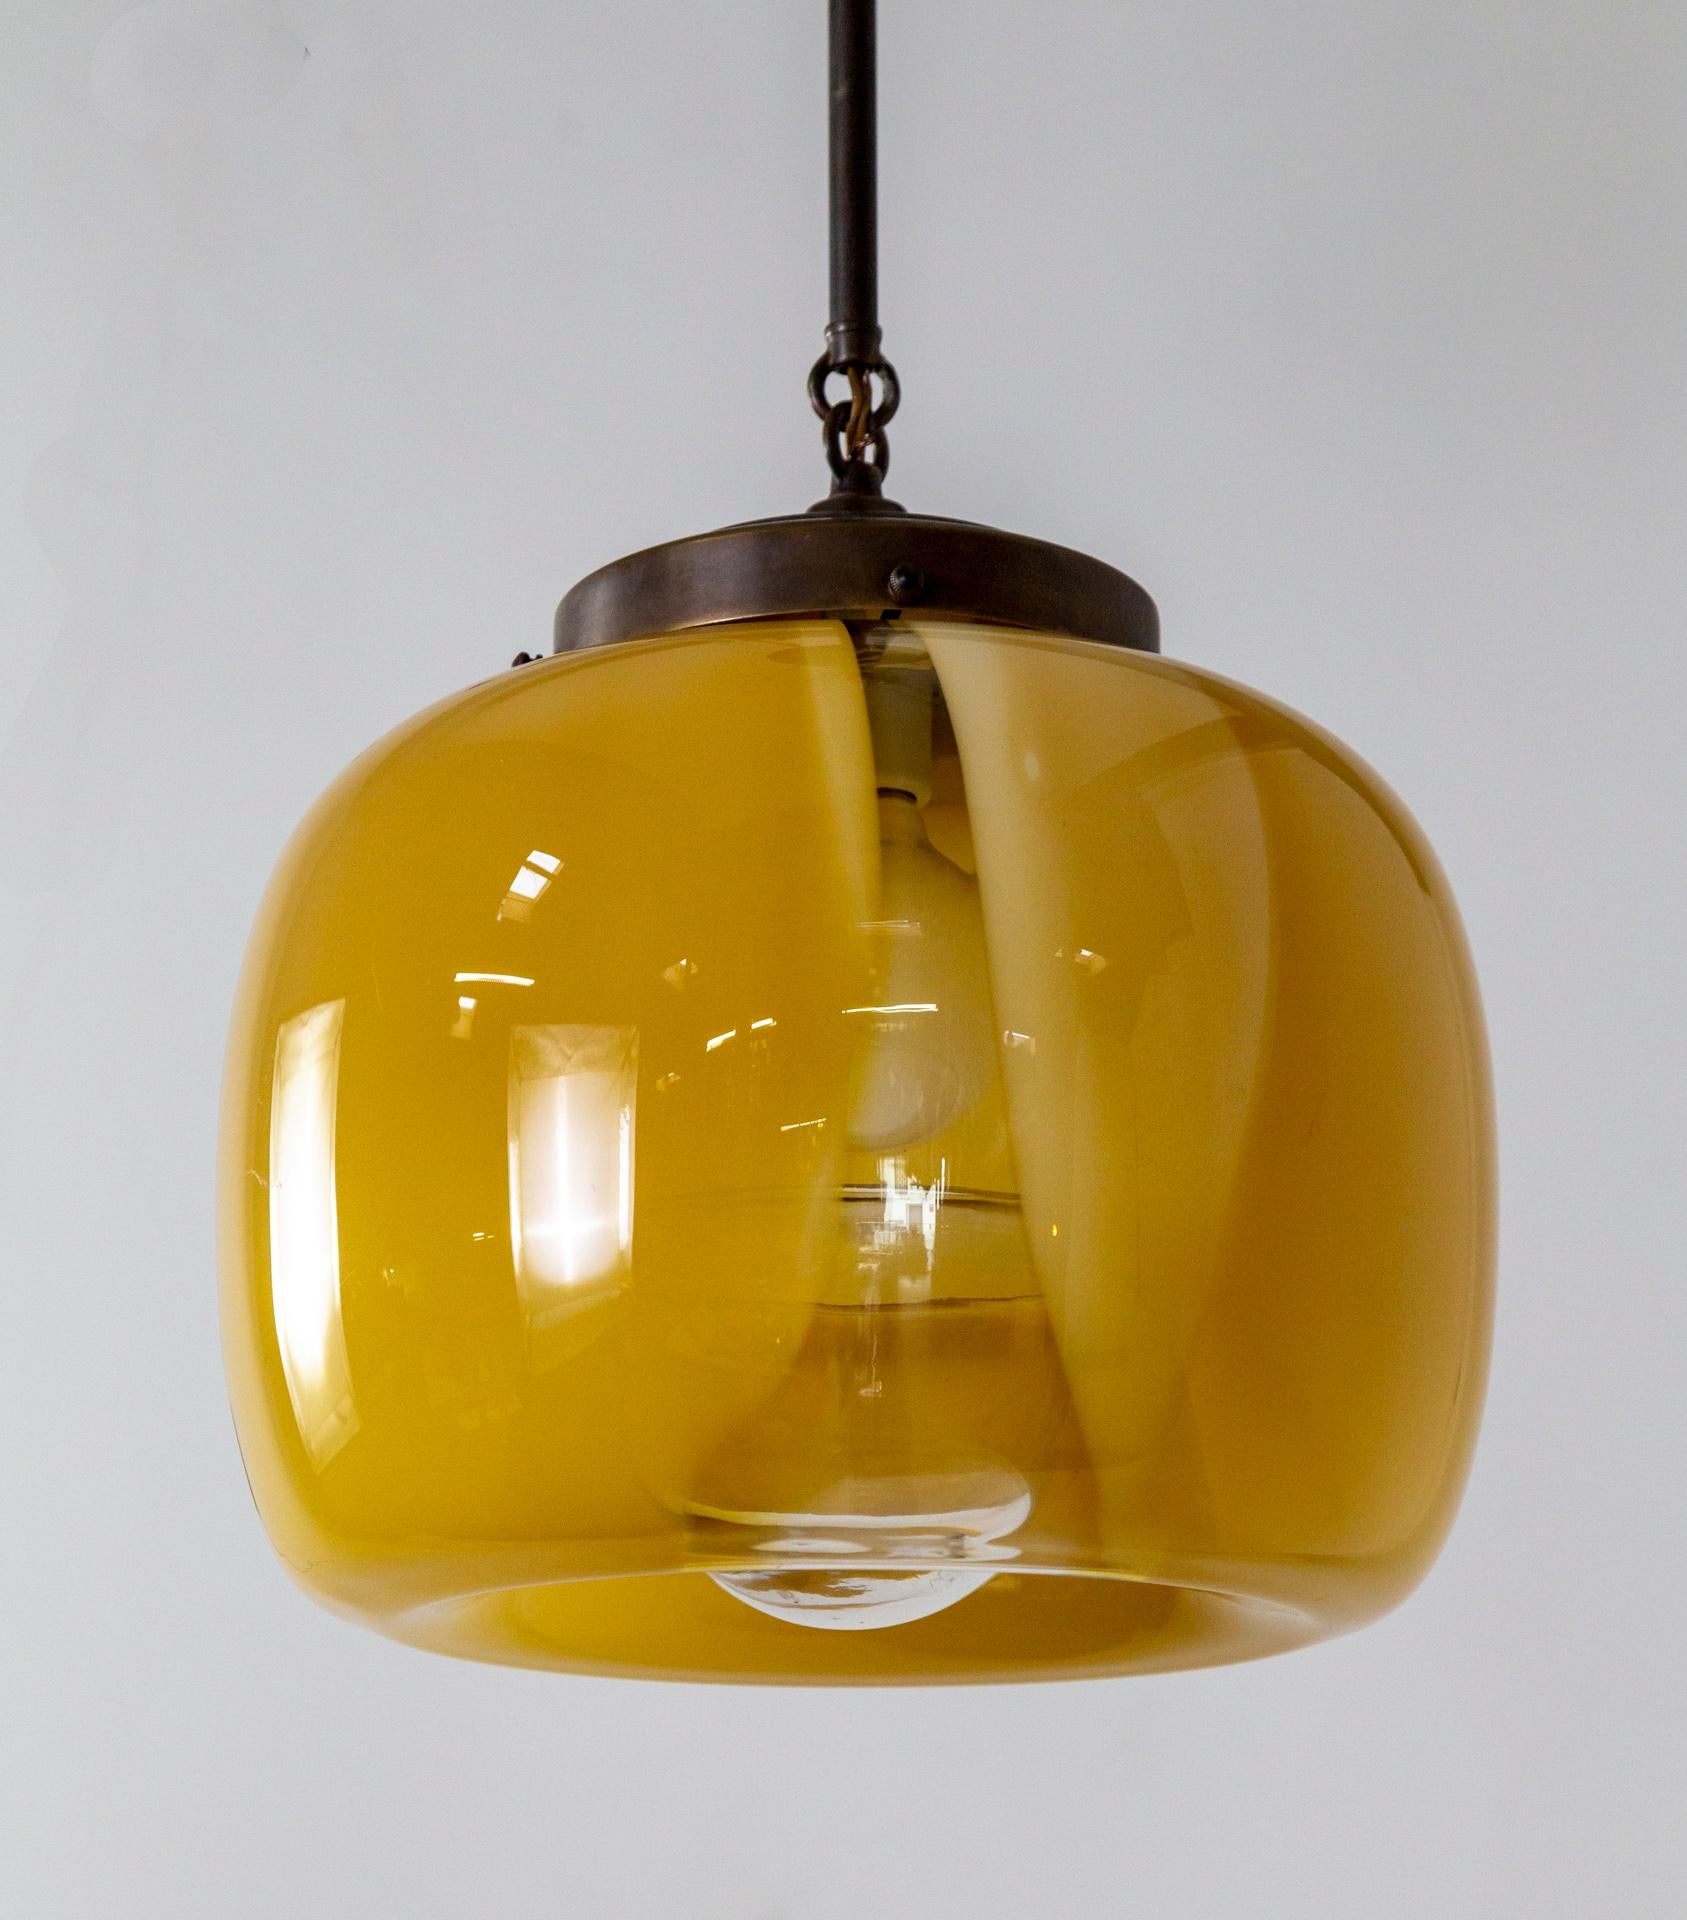 A pendant light with complex, hand-blown, Murano glass shade in a milky yellow-amber color with a clear streak that reveals the inside.  It has a bronze-toned brass canopy, stem, and shade holder.  Made in the 1970s by Mazzega, in Italy.  Great